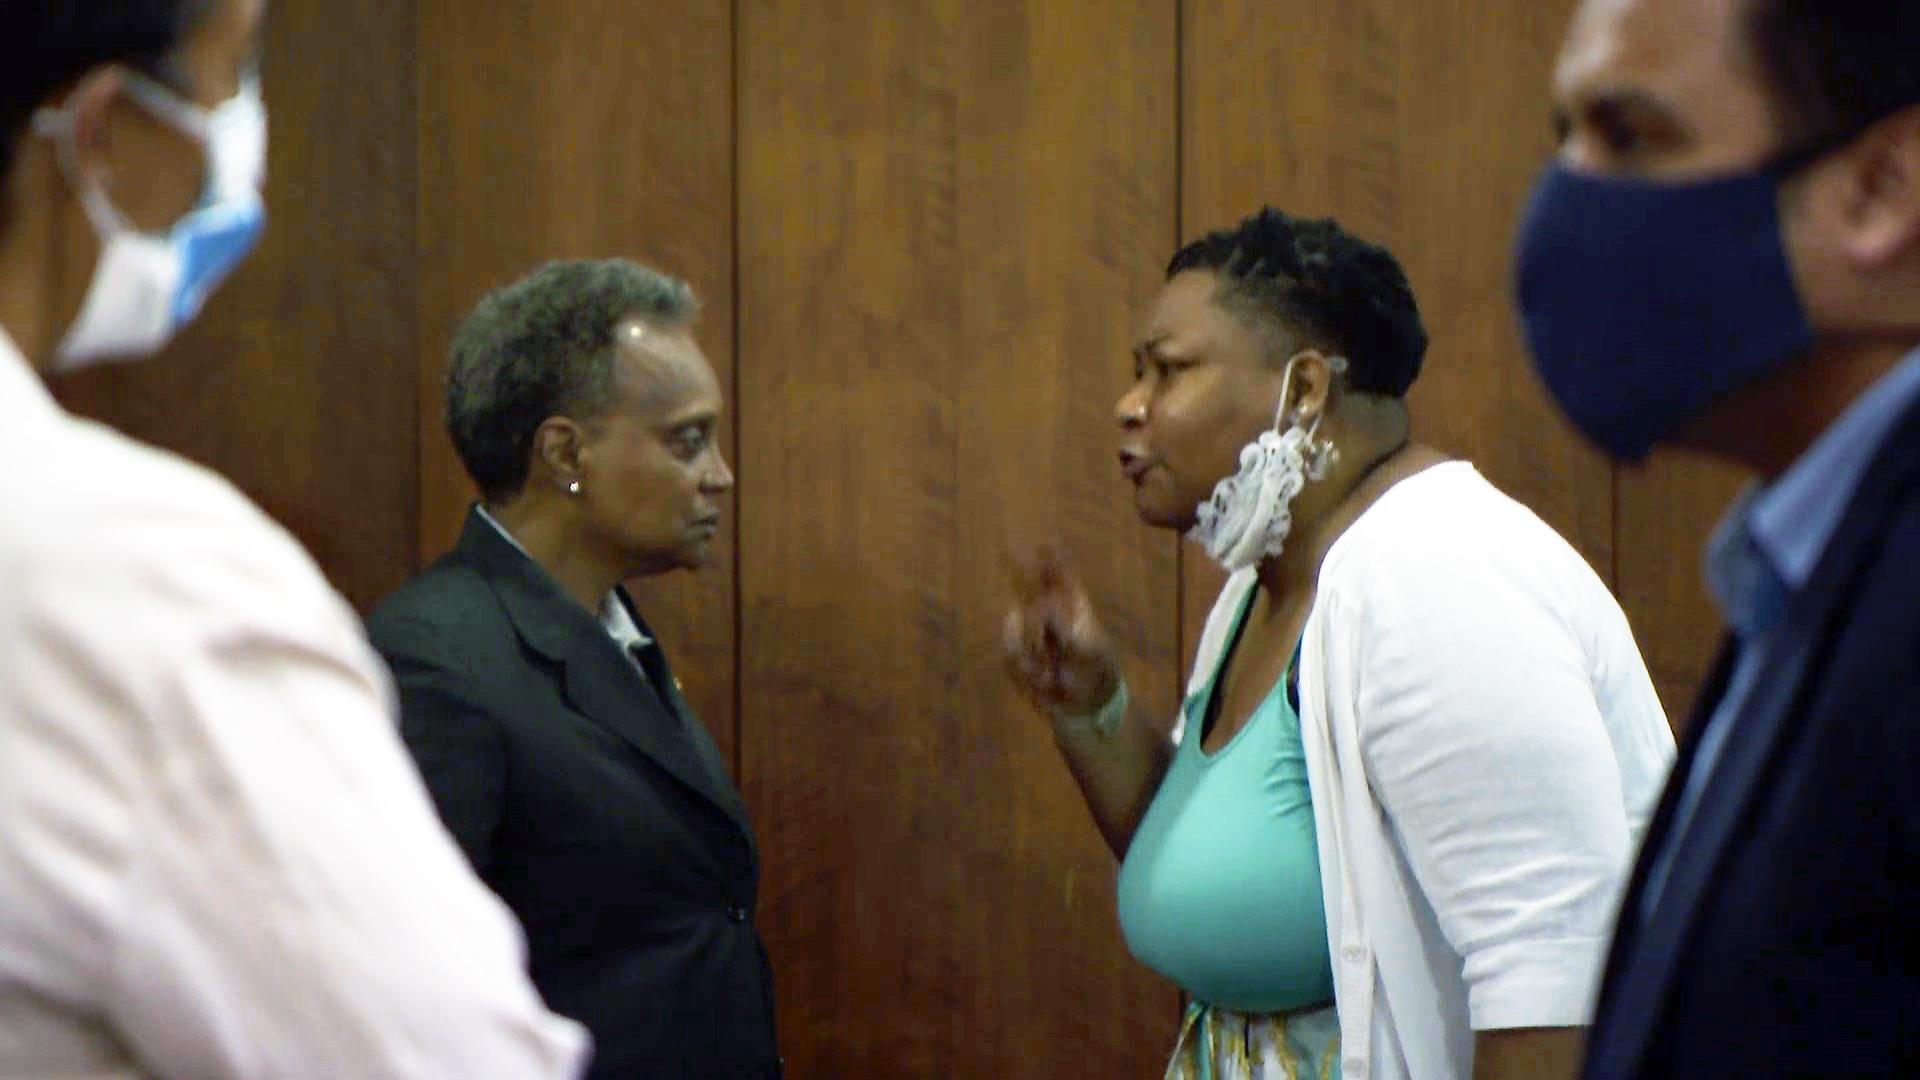 Mayor Lori Lightfoot, left, listens to Ald.  Jeanette Taylor (20th Ward) responds to her request to allow the Chicago City Council to vote to confirm Celia Meza as the city's top lawyer at a city council meeting on Wednesday, June 23, 2021. (WTTW News)